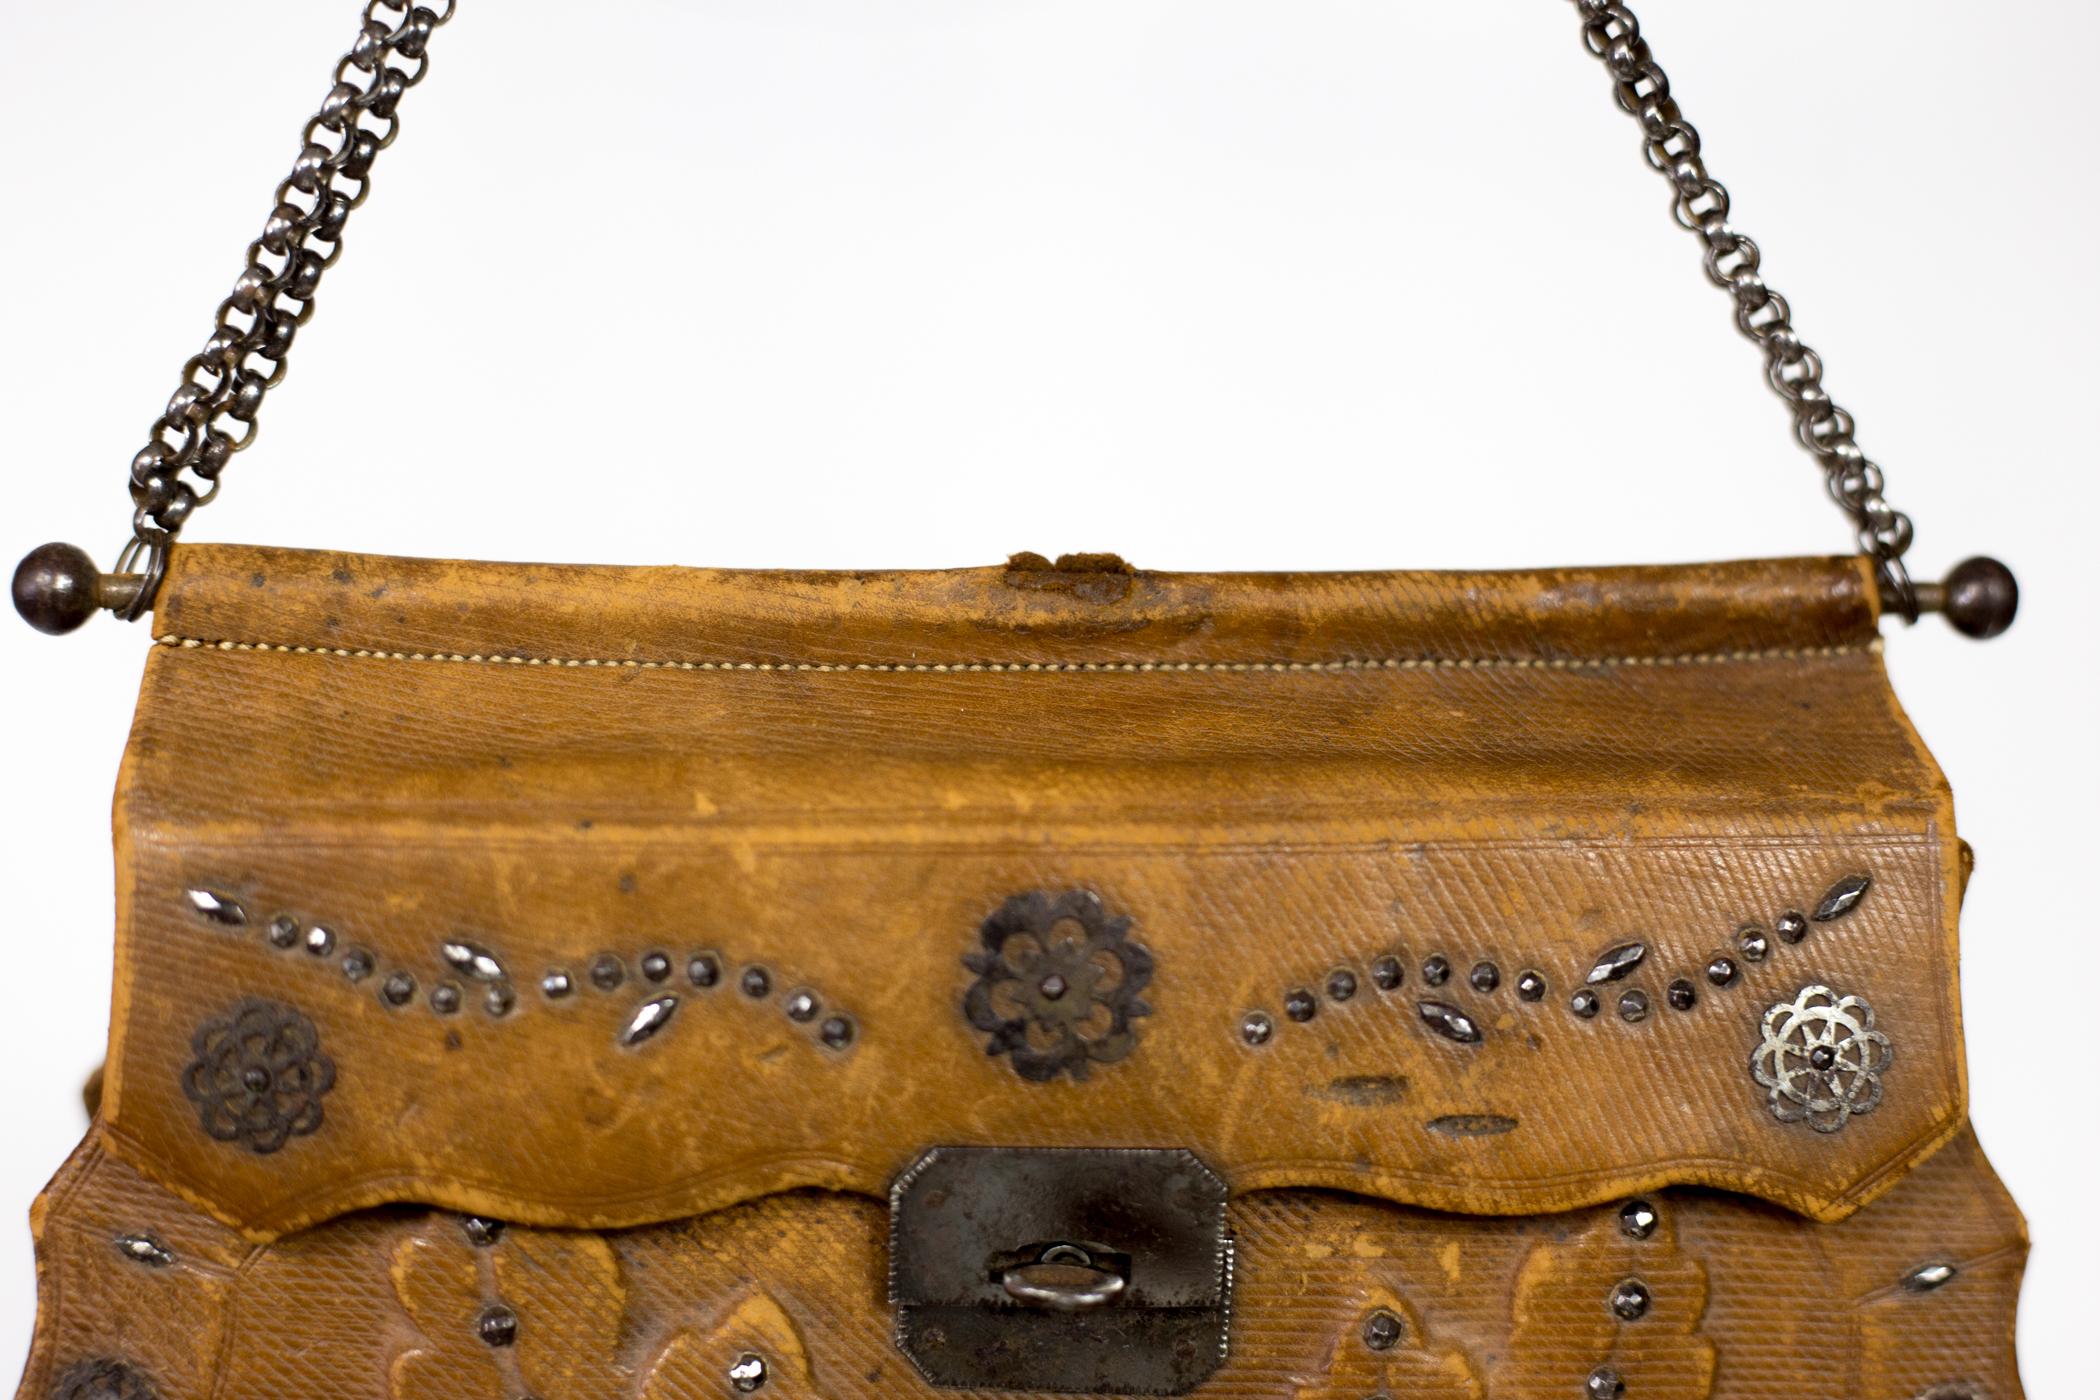 A French Empire Reticule in Leather and Steel beads - France Circa 1795-1815 For Sale 3